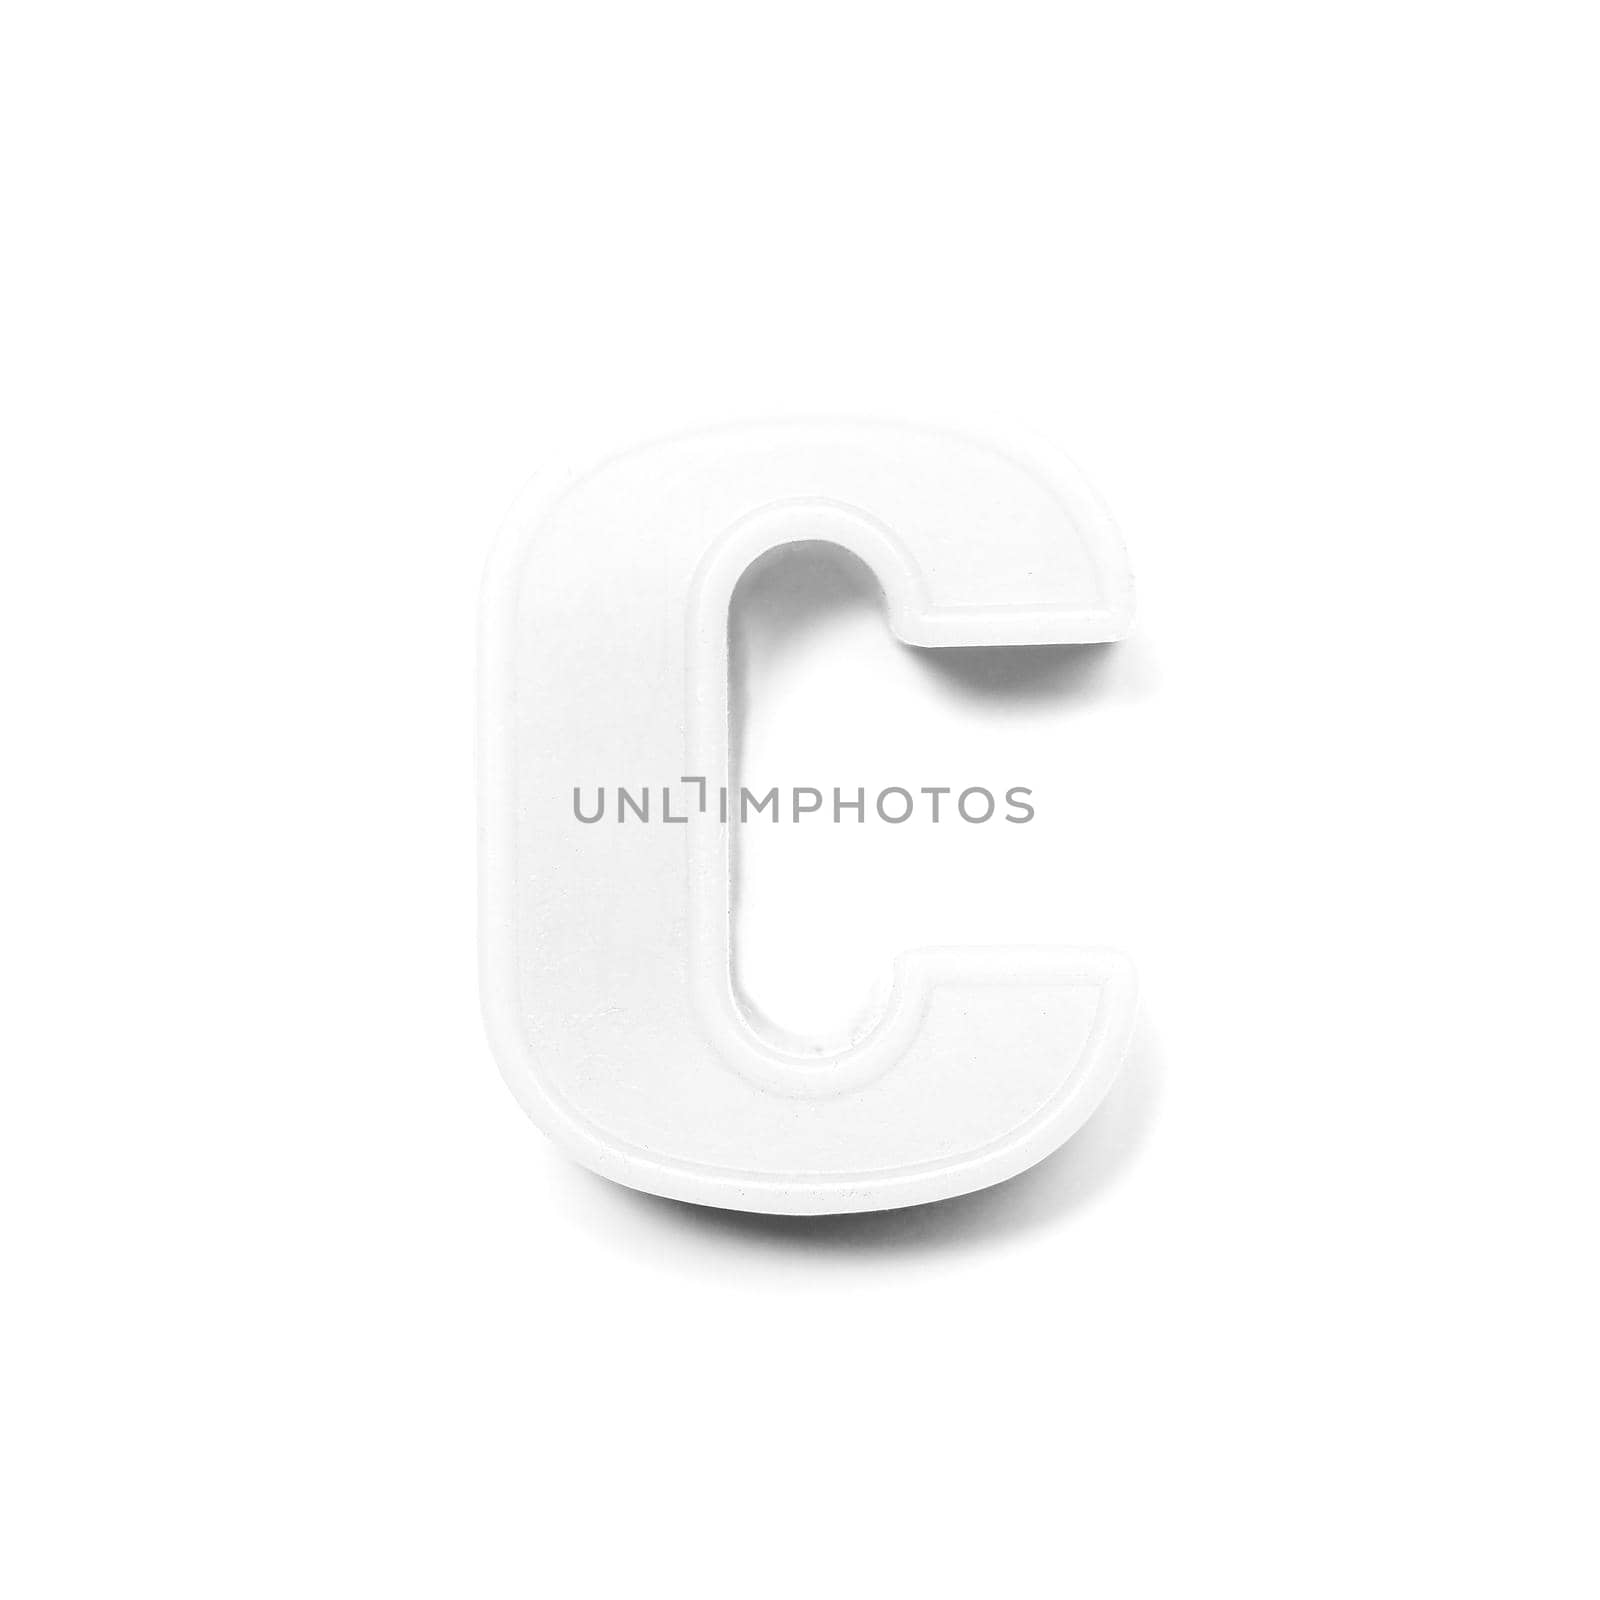 Magnetic lowercase letter C in black and white by claudiodivizia